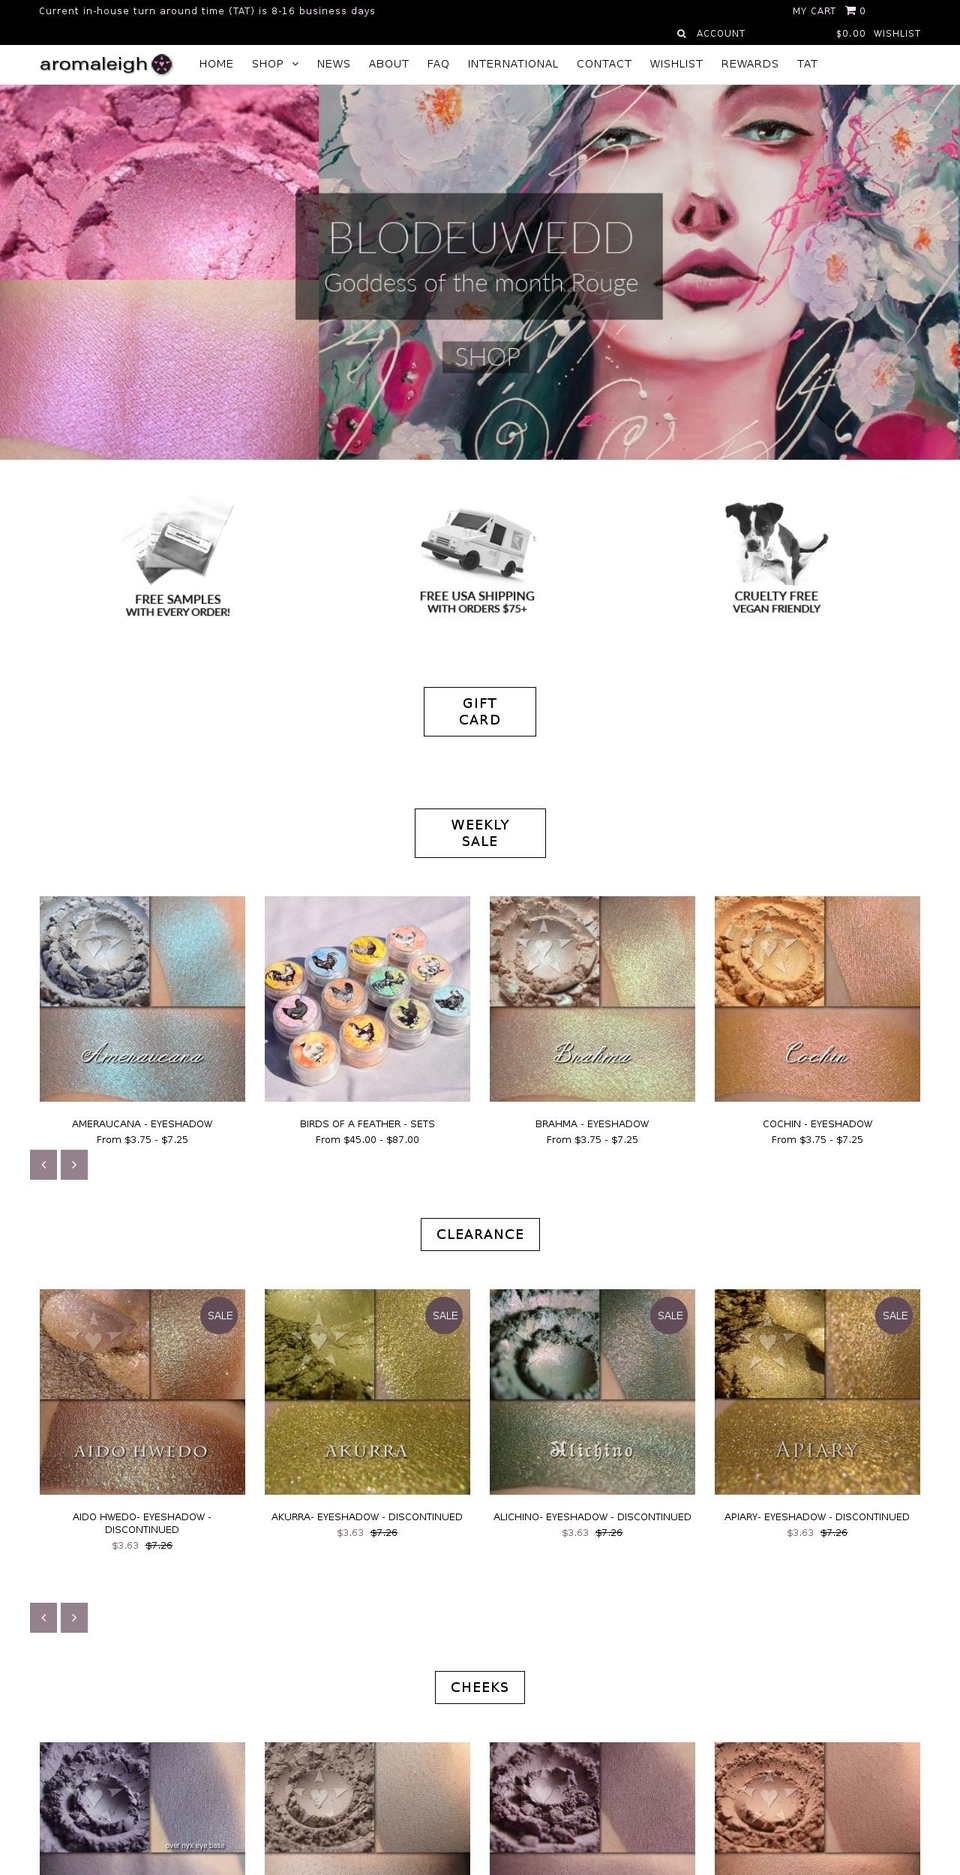 Icon Shopify theme site example aromaleigh.com